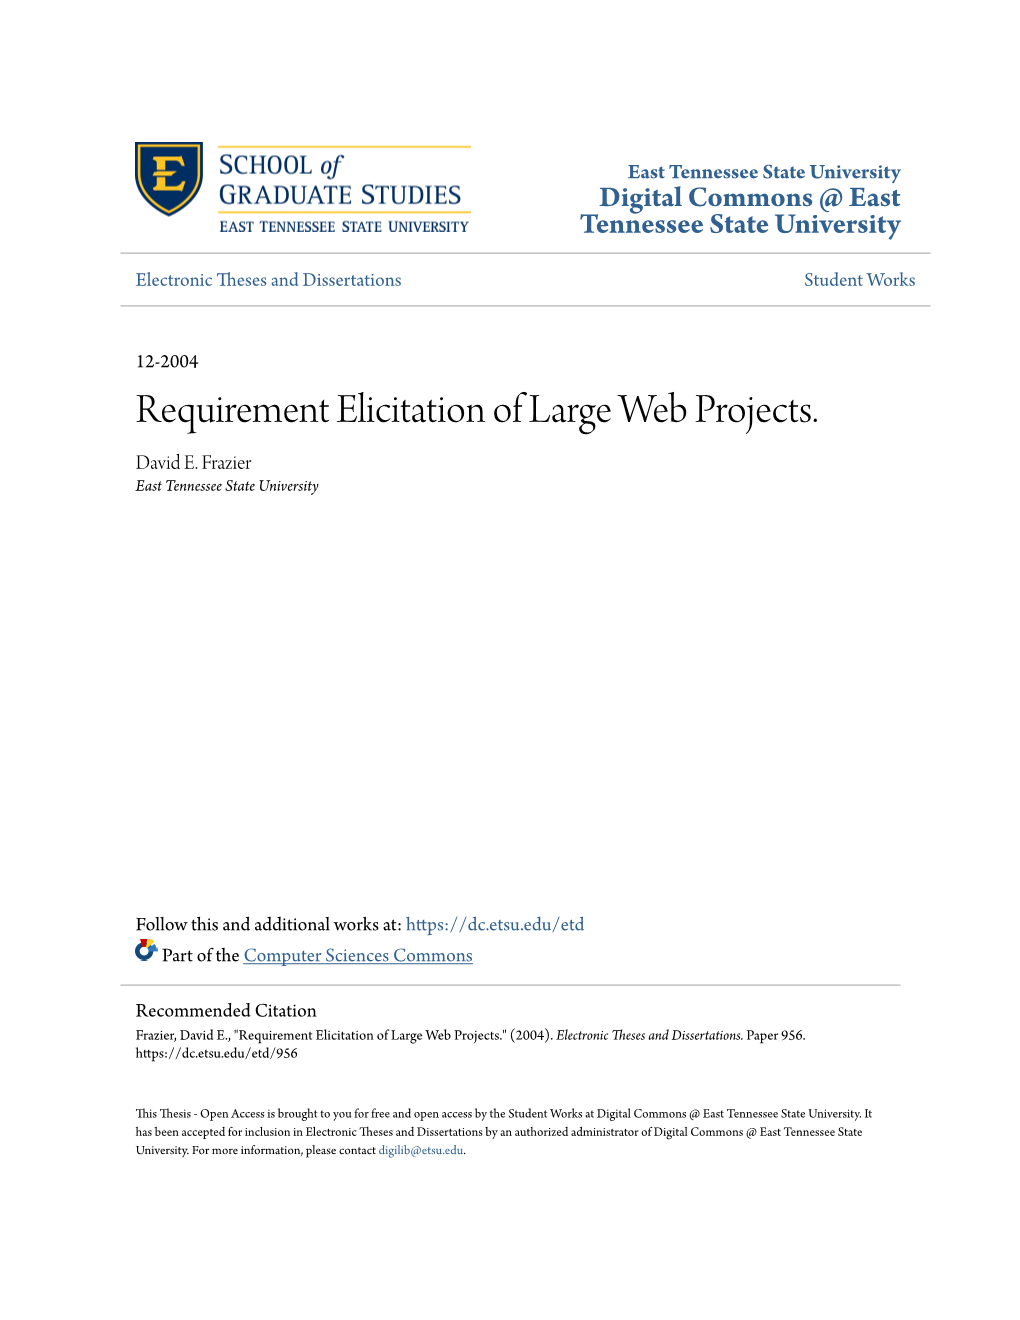 Requirement Elicitation of Large Web Projects. David E